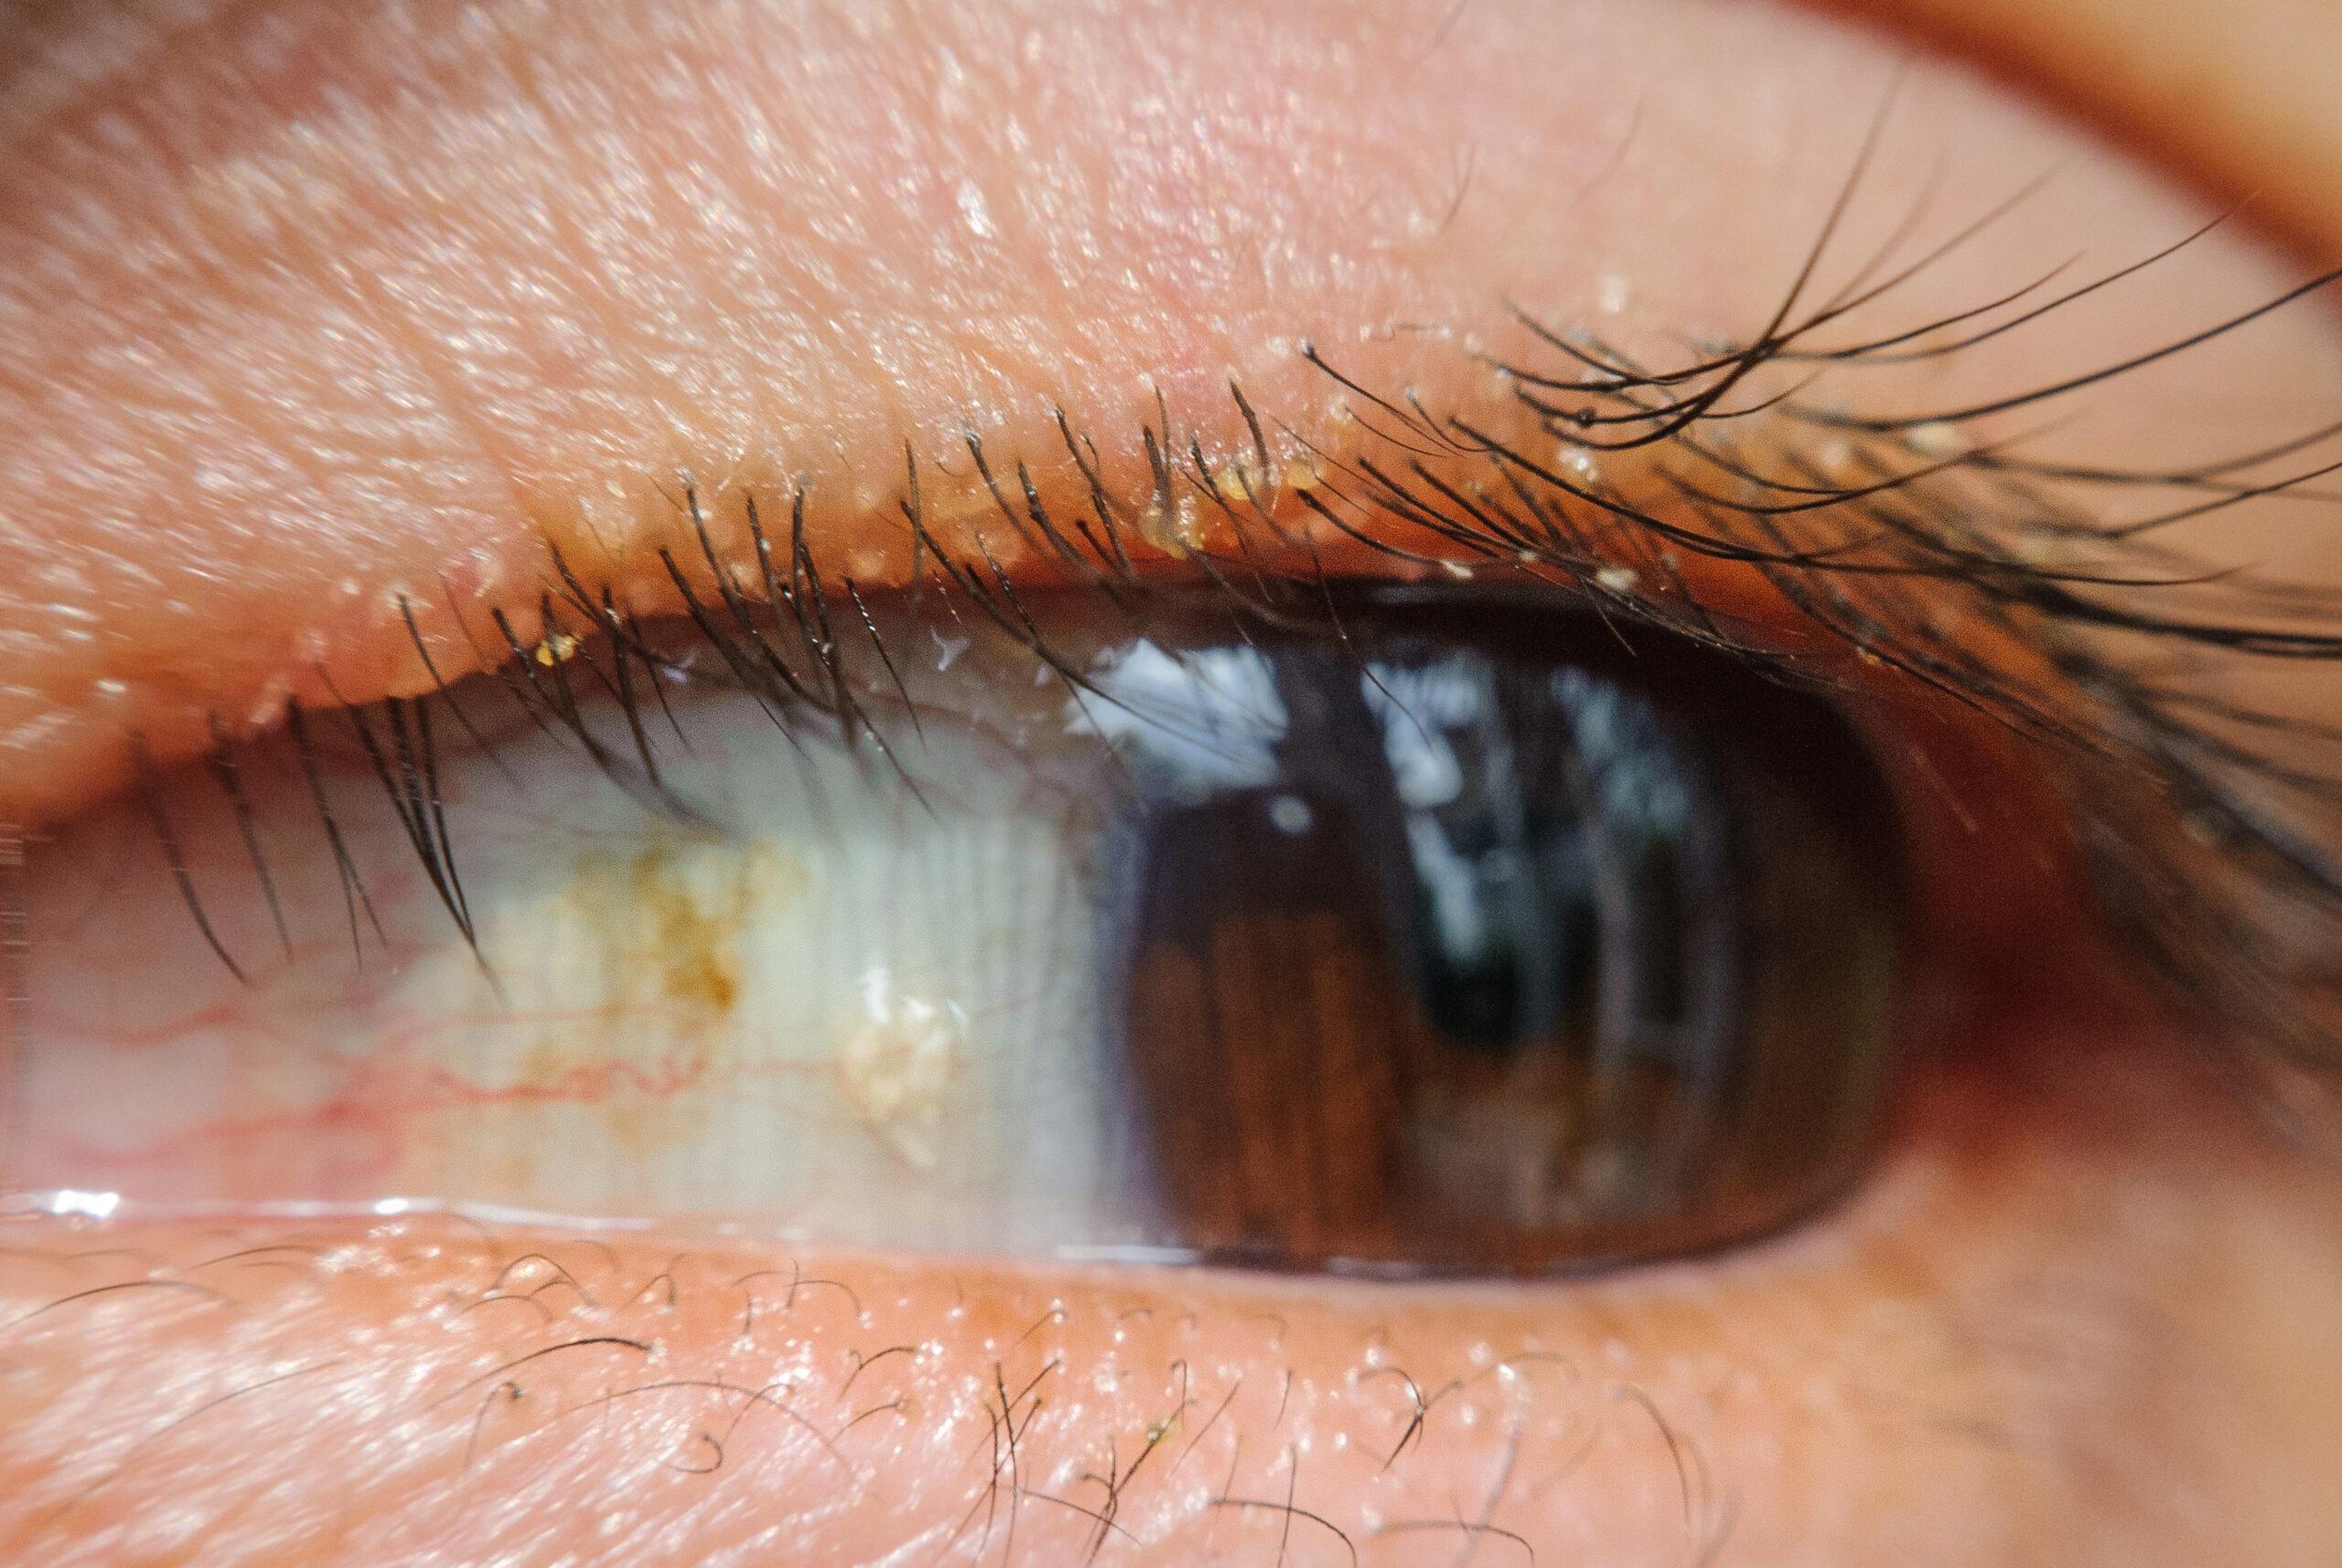 close up Blepharitis or Eyelid inflammation eyes healthy concept